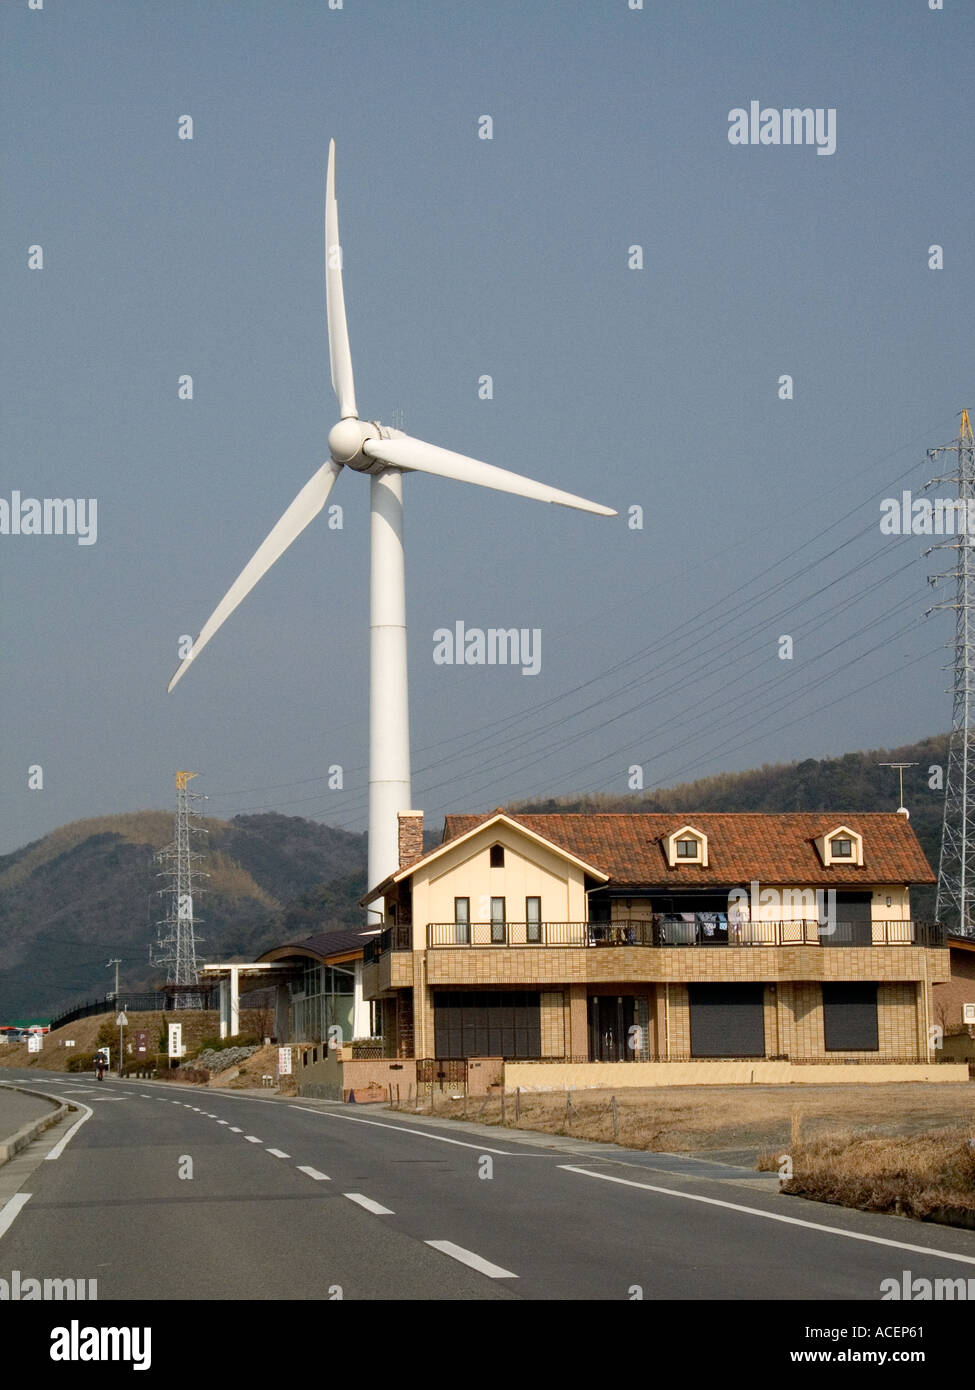 A Small Wind Generator Installed in an Industrial Zone within the City  Stock Image - Image of electric, construction: 187496759